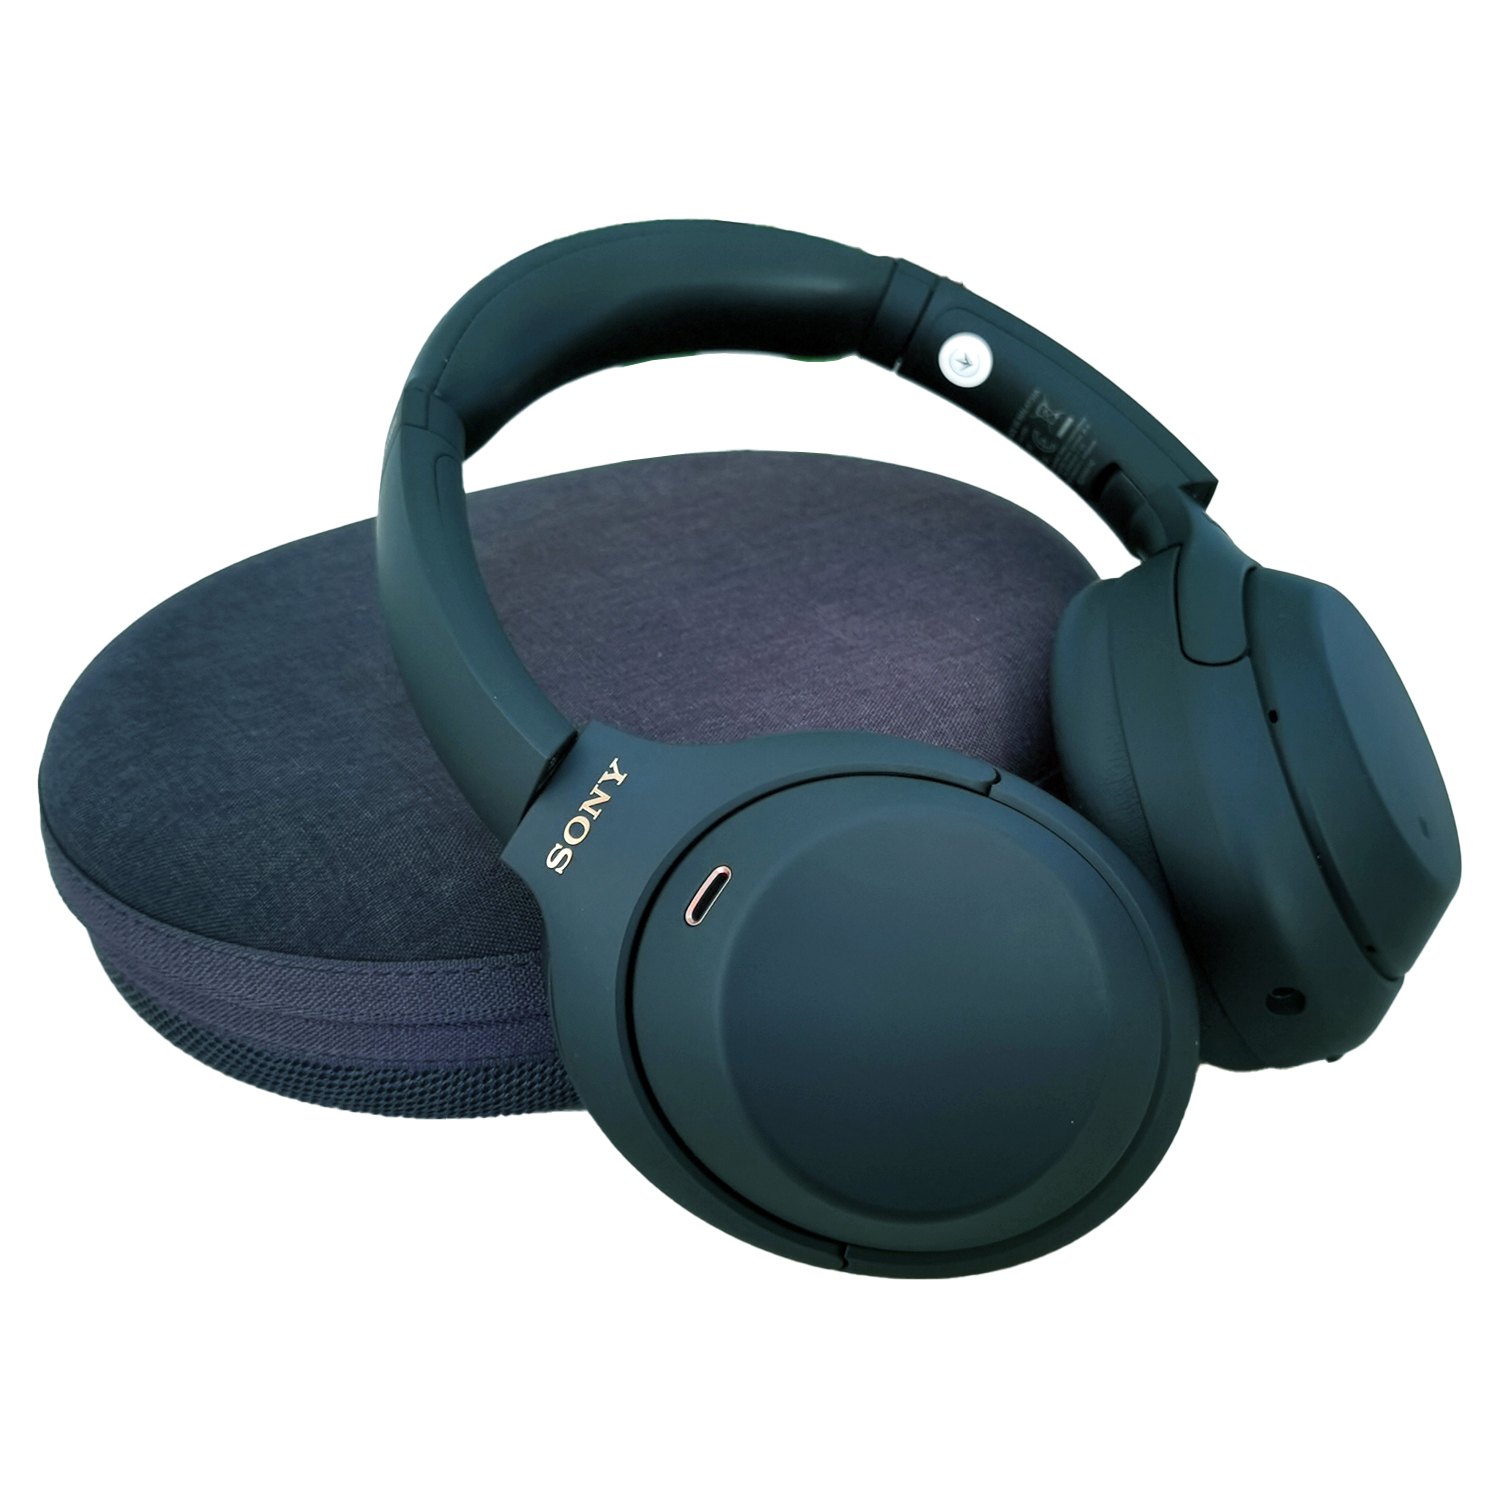  Sony WH-1000XM4 Wireless Noise-Canceling Over-Ear